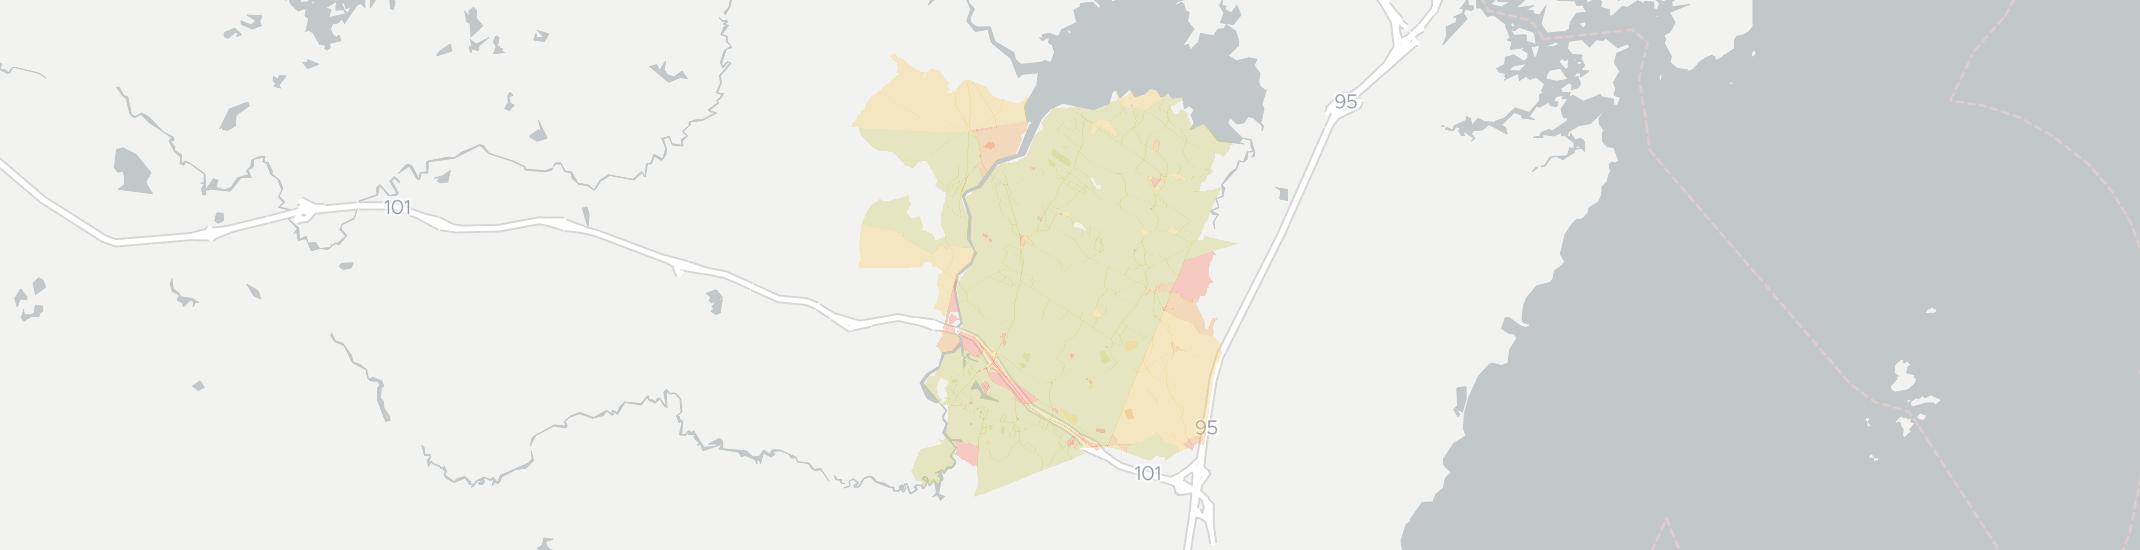 Stratham Internet Competition Map. Click for interactive map.